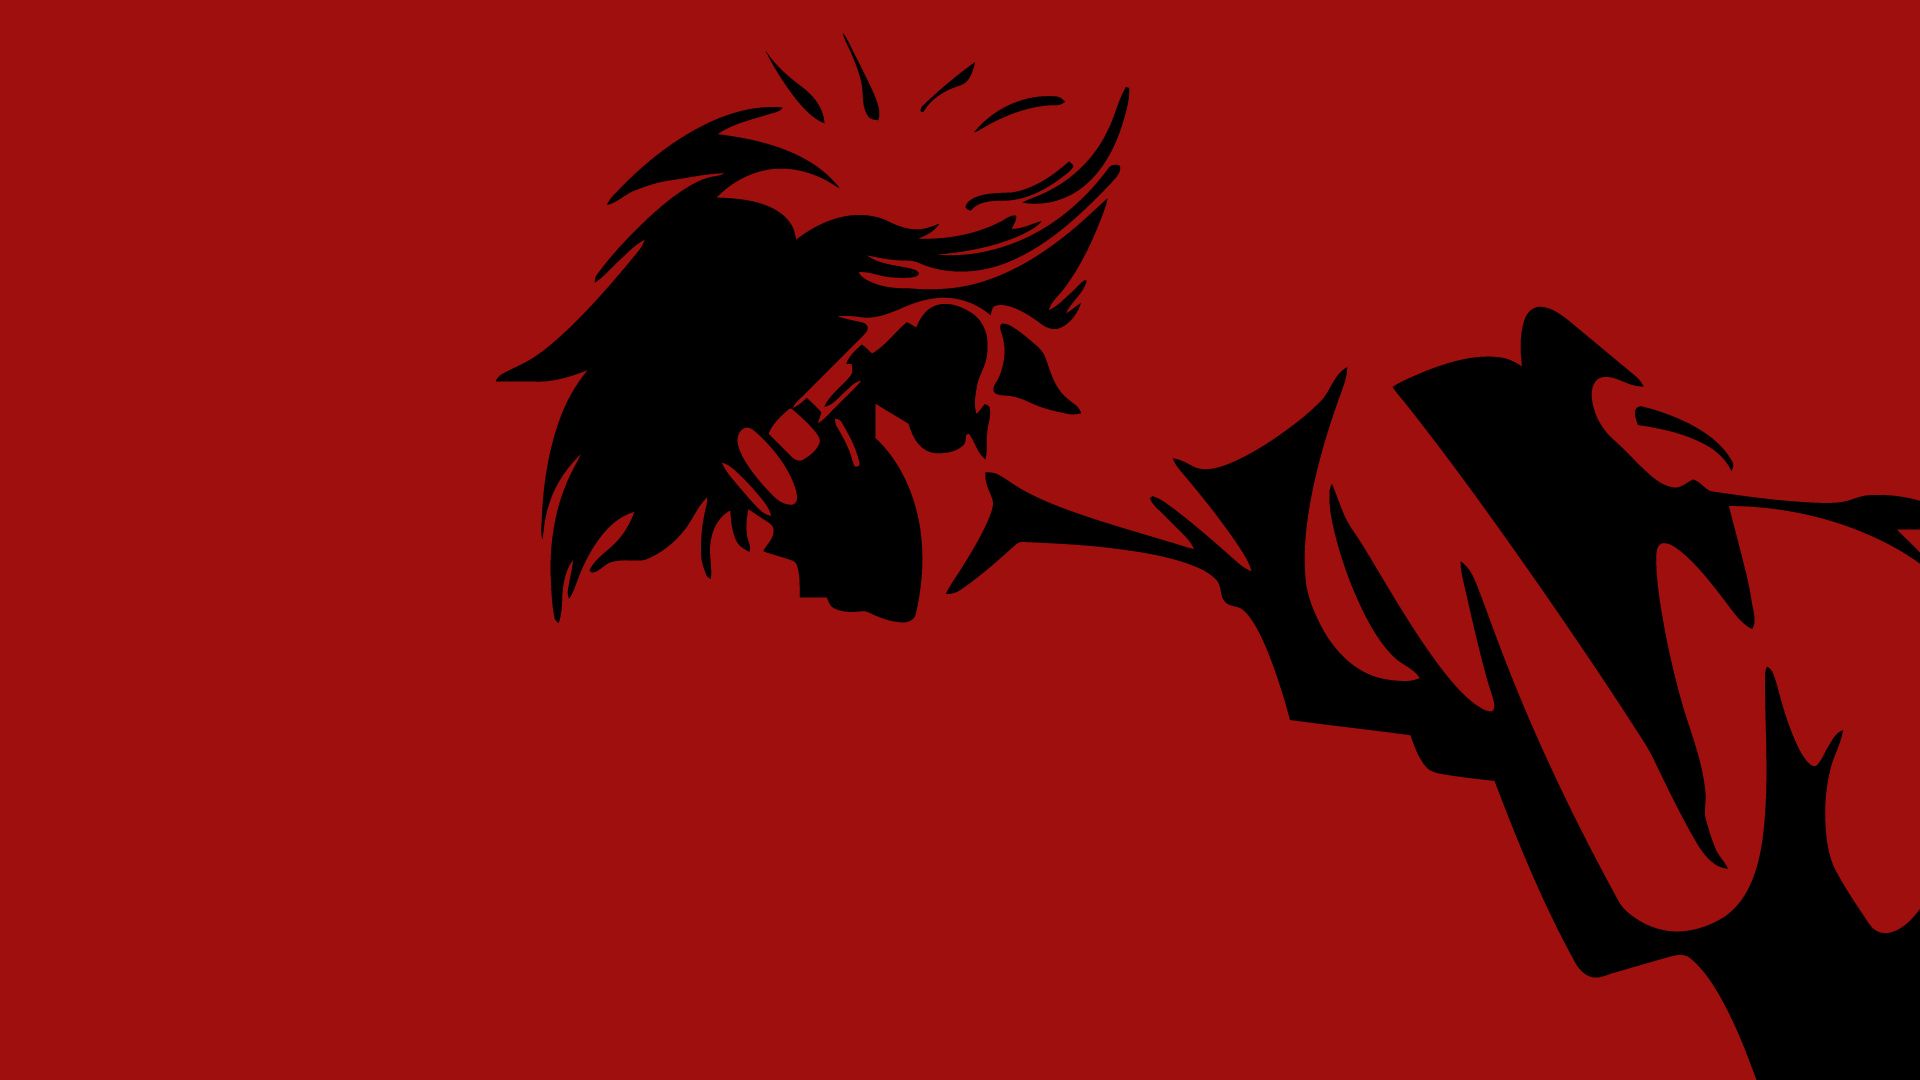 Edward. I'm In Love With Her. (Home Desk 21 12). Cowboy Bebop, Cowboy Bebop Anime, Cowboy Bebop Wallpaper